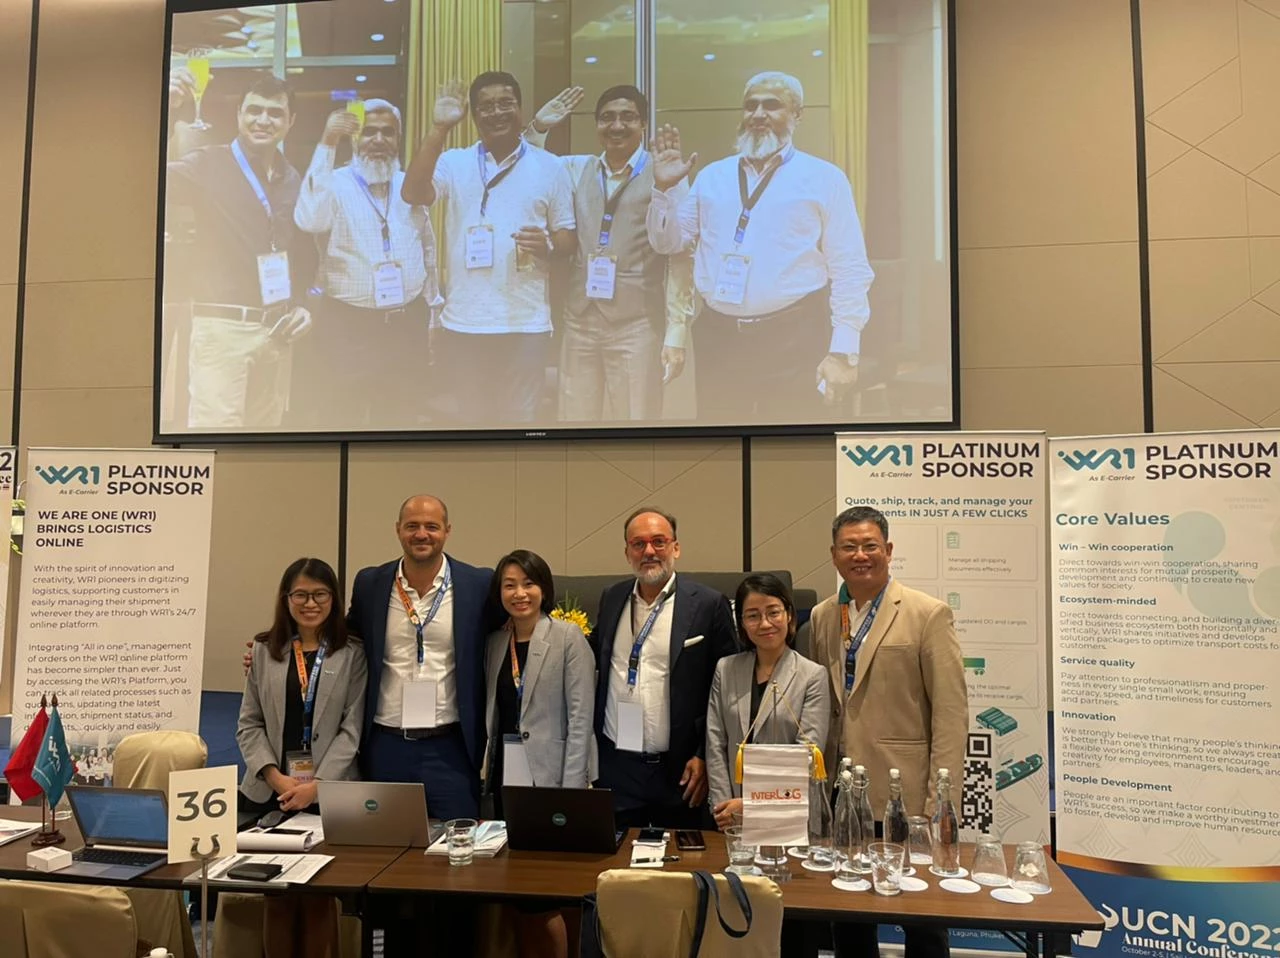 InterLOG successfully "launched" the WR1 brand at Uconnect Worldwide Network 2022 (UCN 2022)